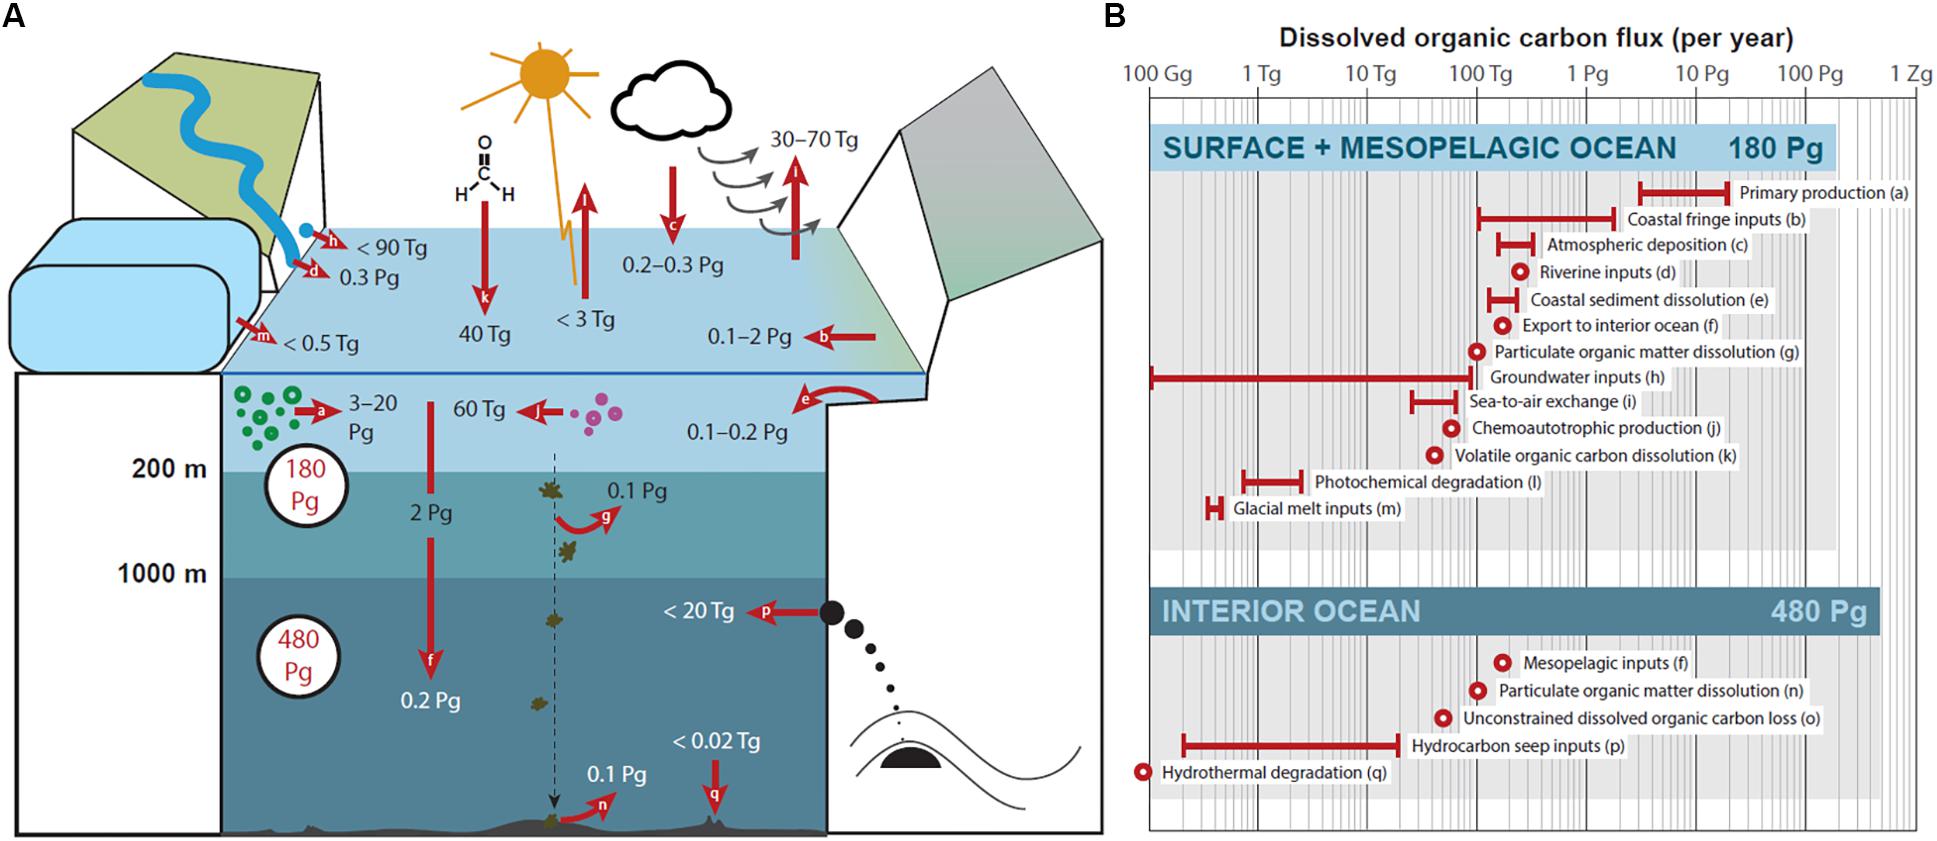 Frontiers  Soothsaying DOM: A Current Perspective on the Future of Oceanic  Dissolved Organic Carbon